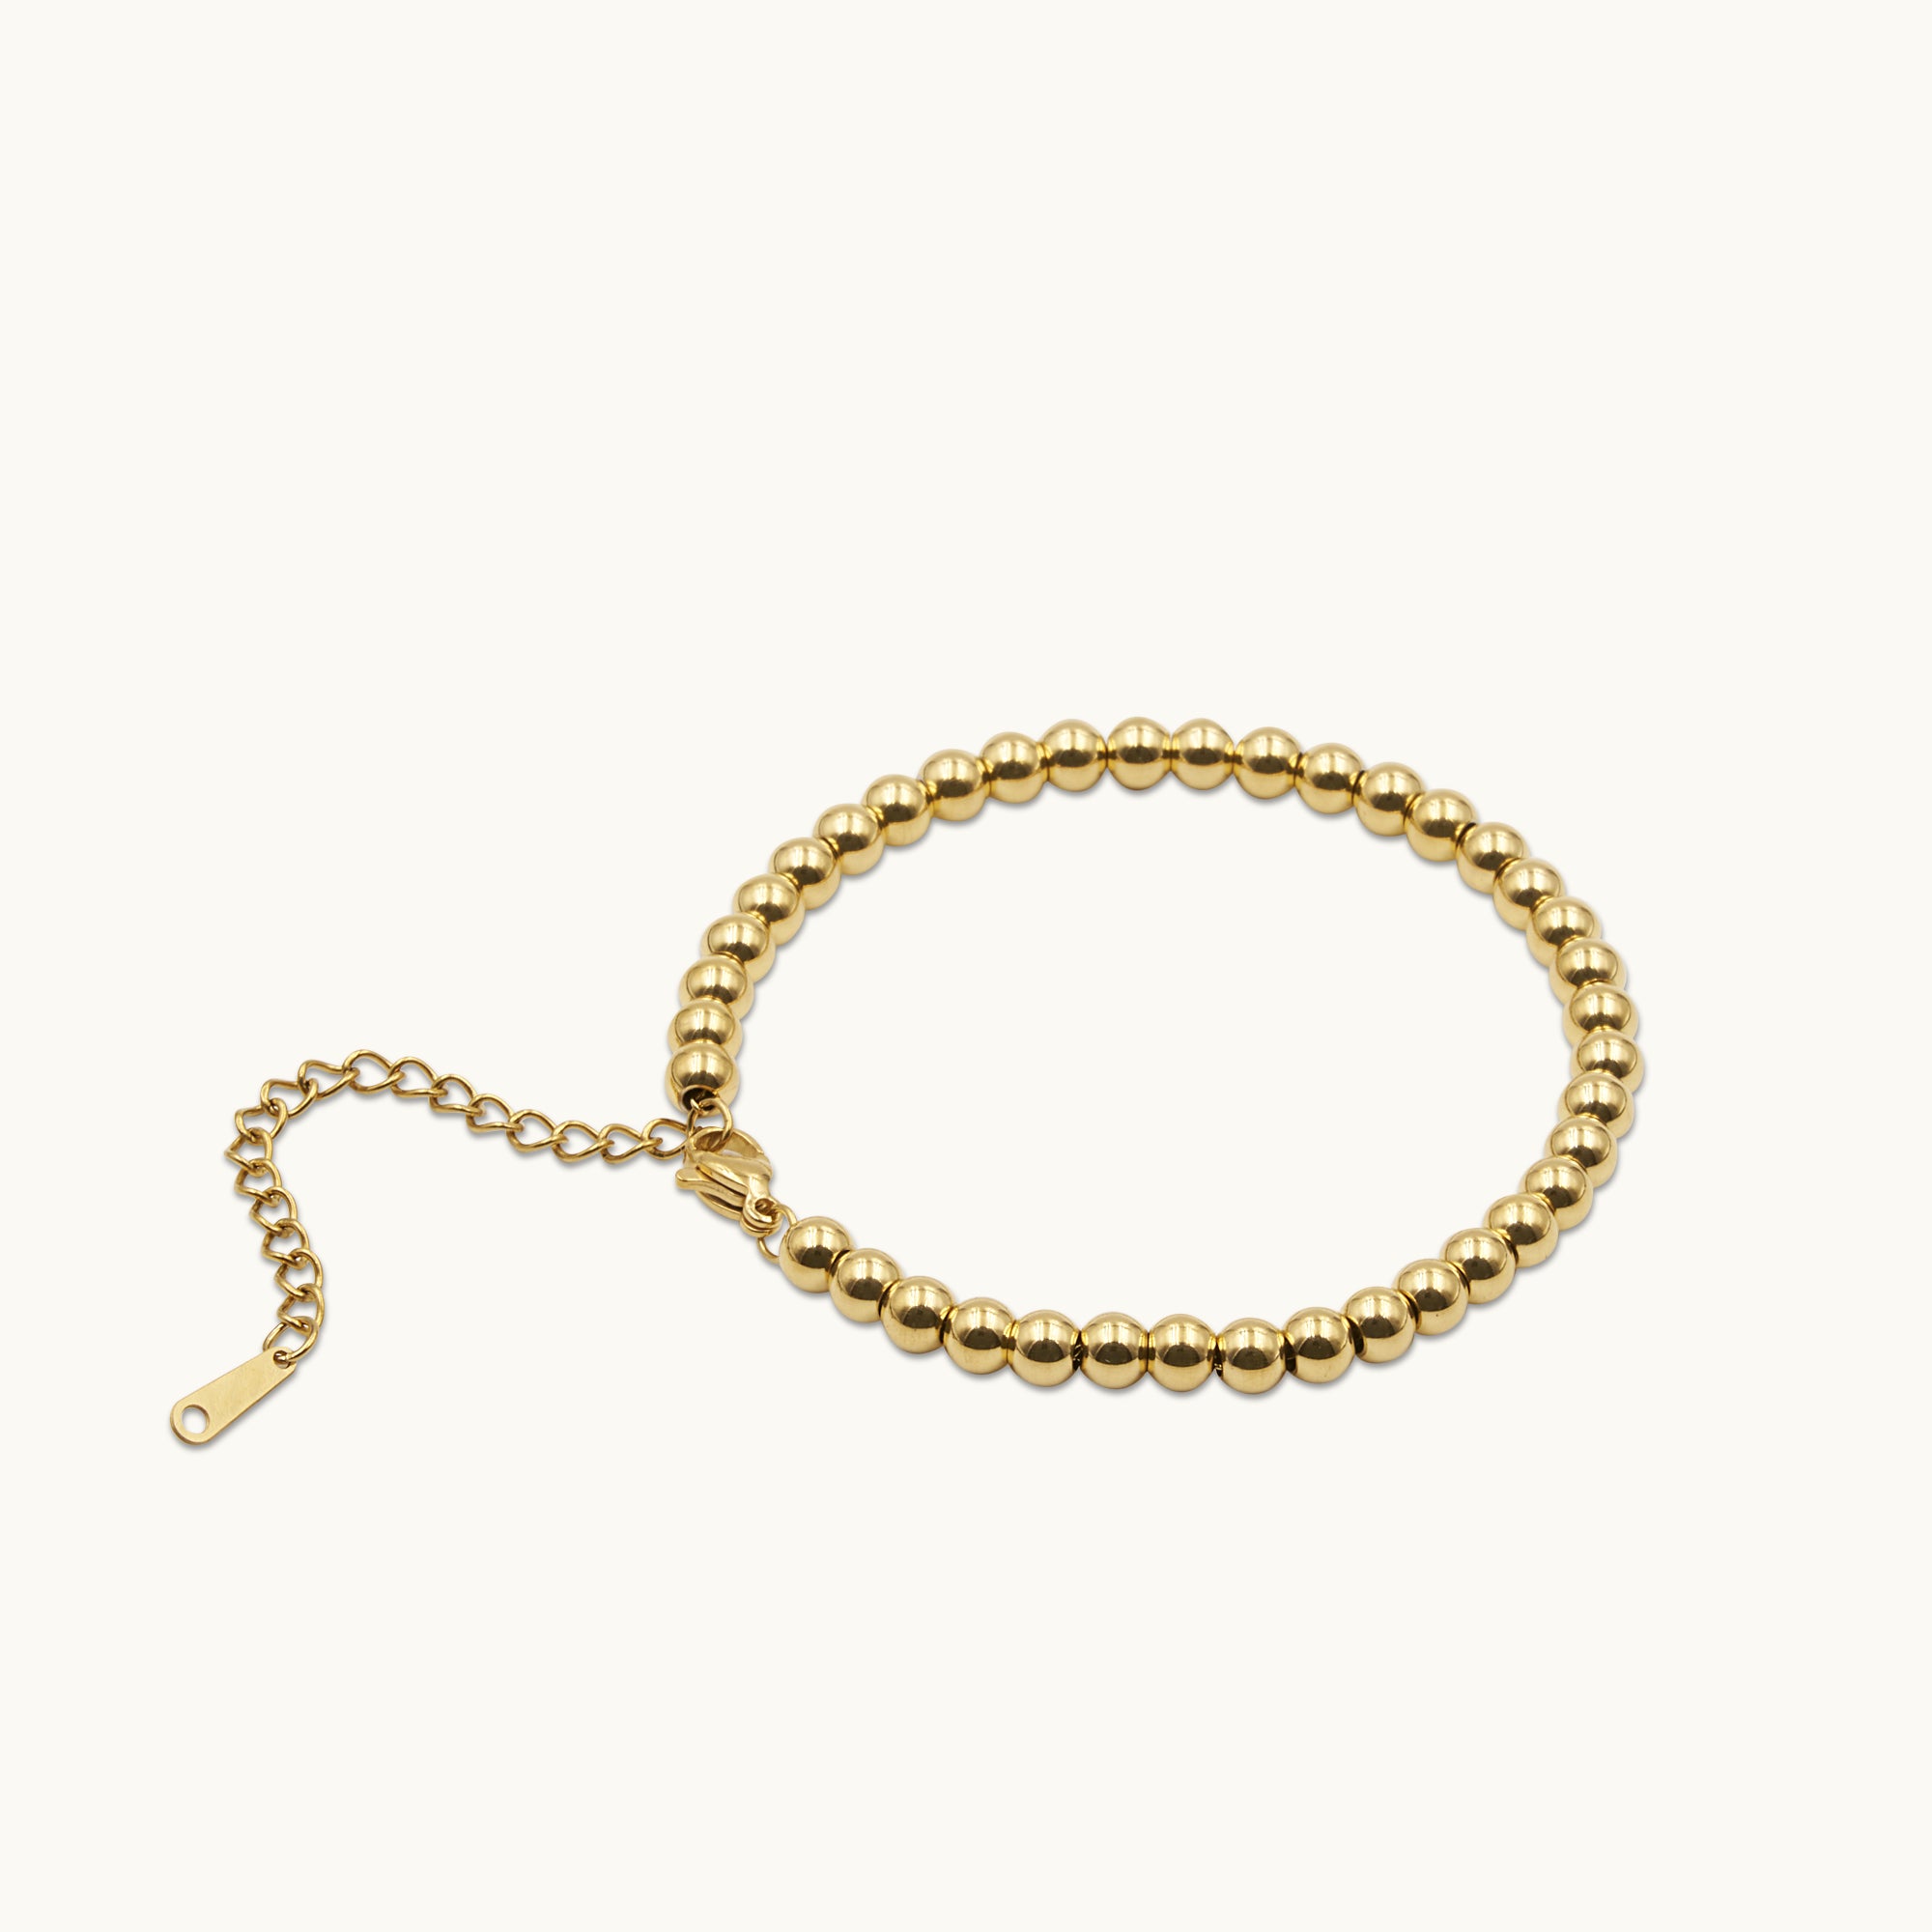 Stack The Gold Beads Bracelet, 5mm